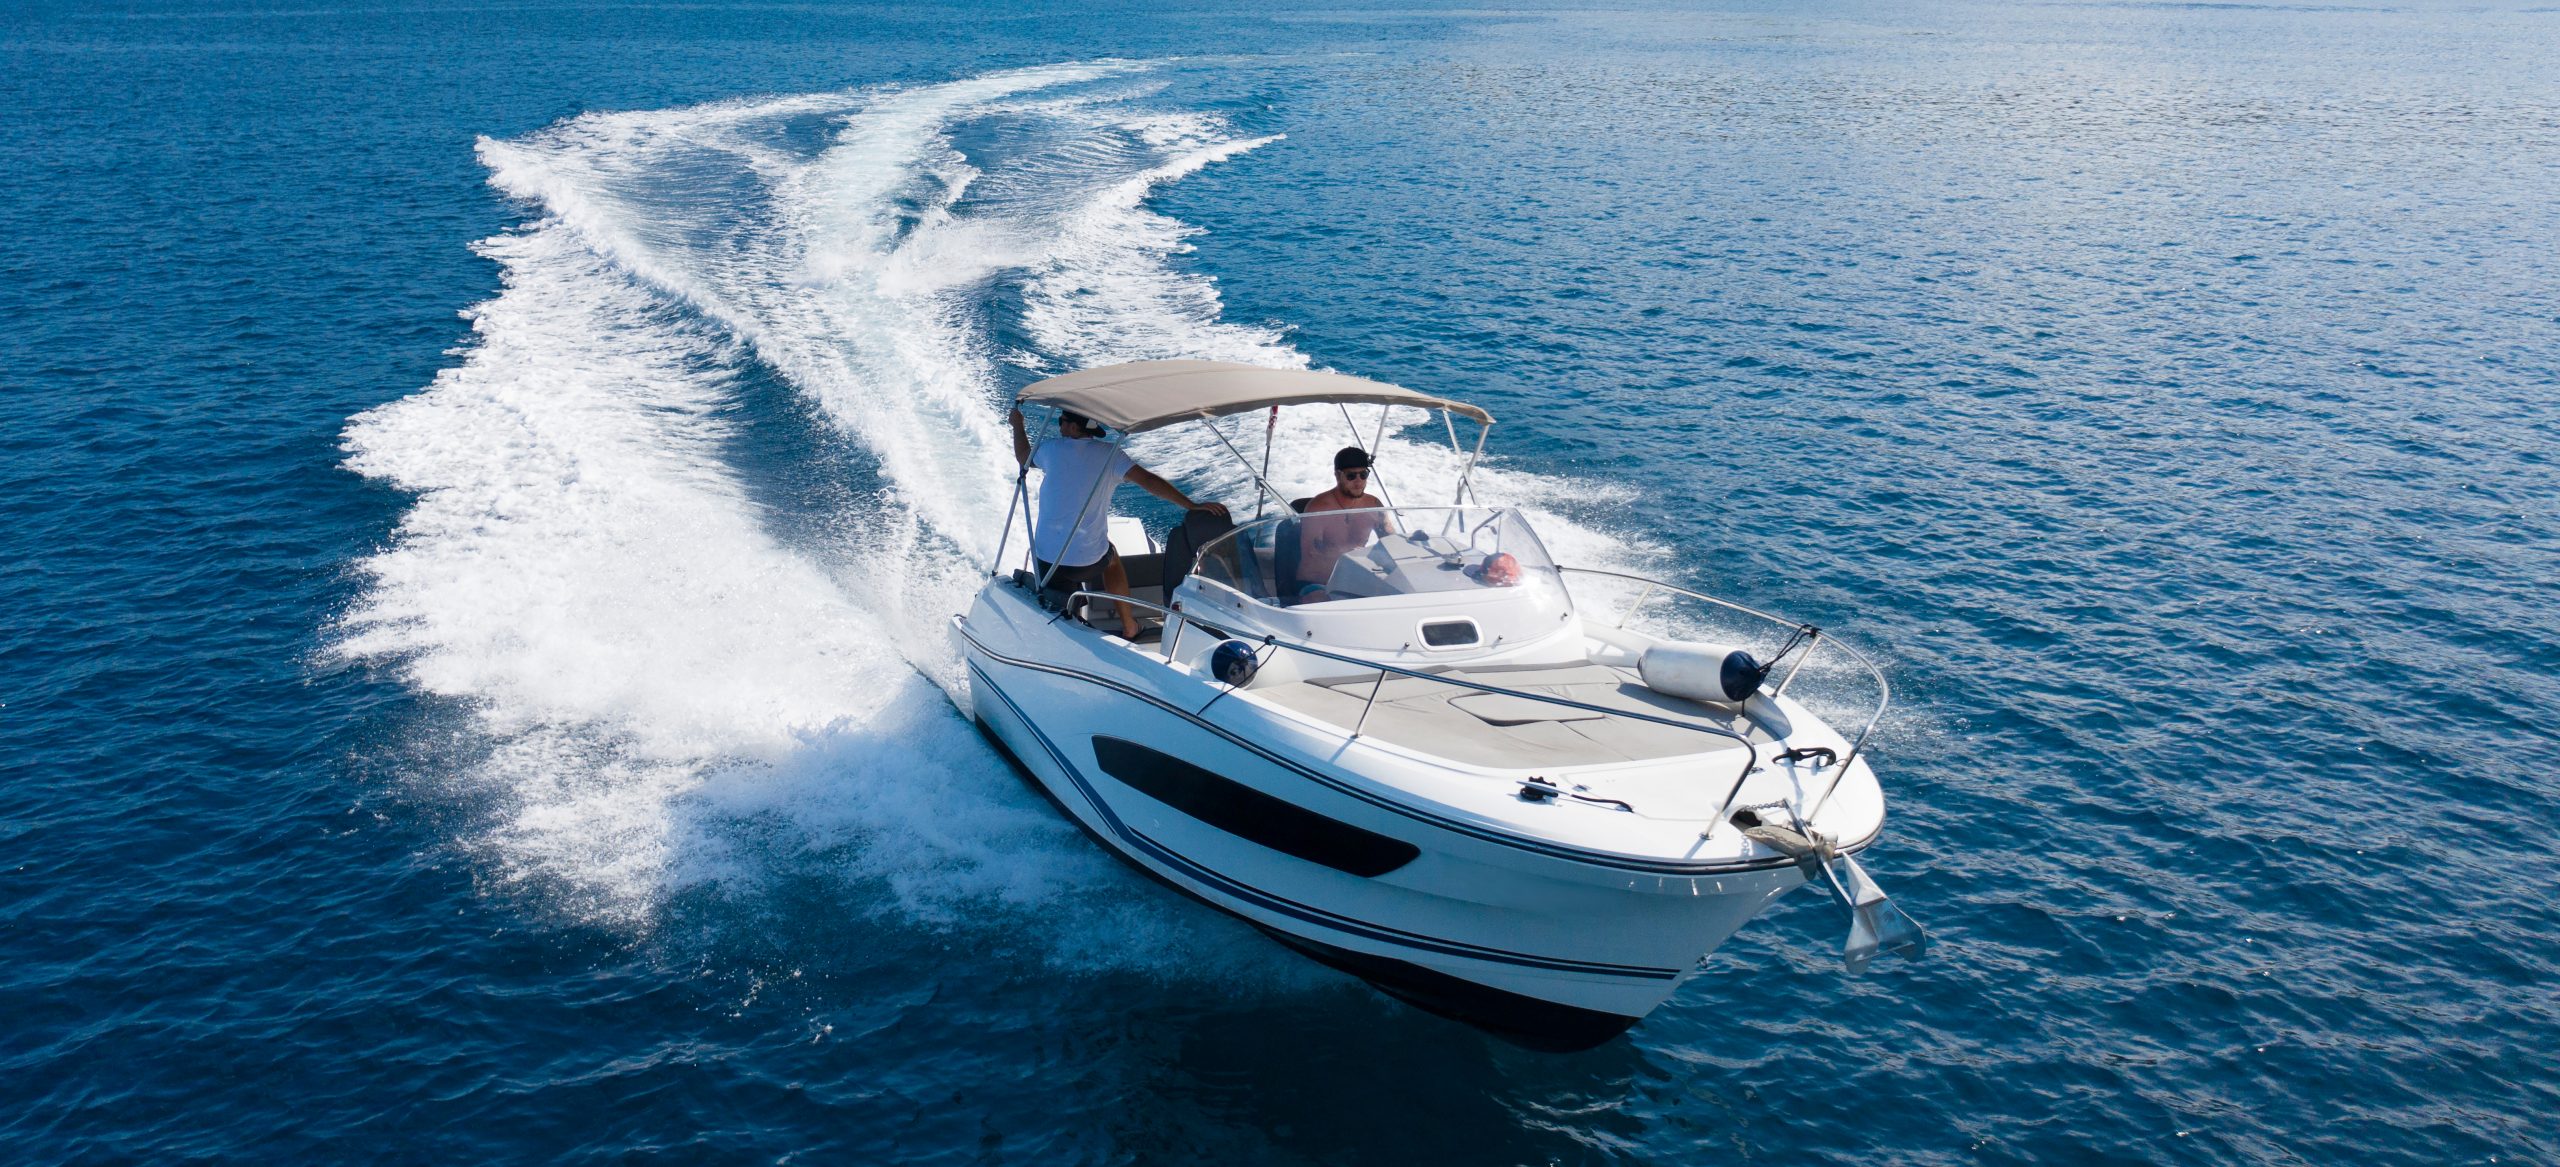 Ontario Boating License & Boater Safety Course